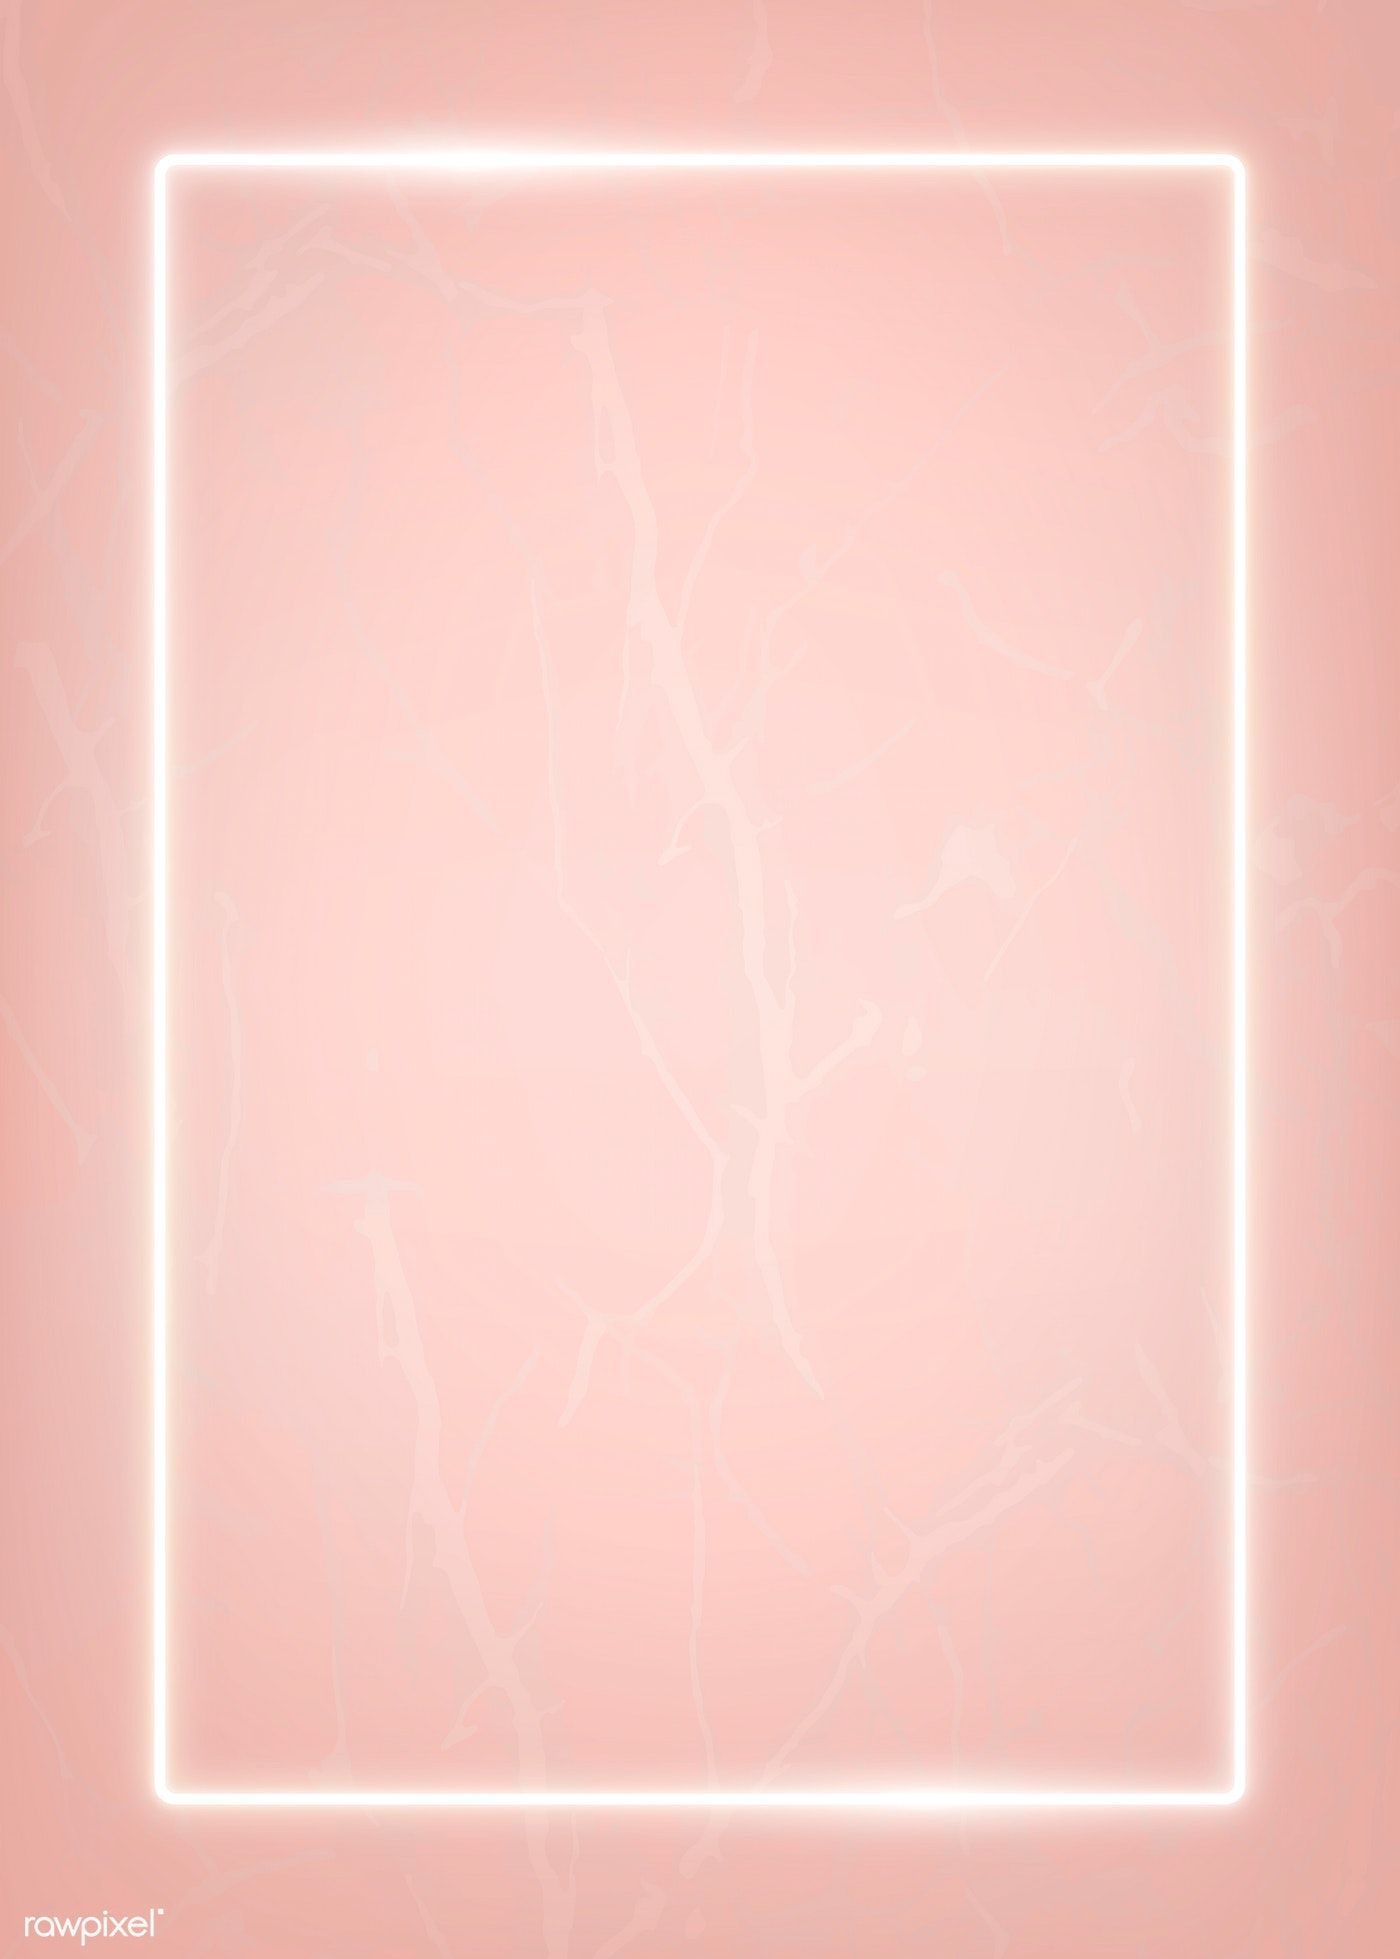 Download premium vector of Rectangle white neon frame on a pastel